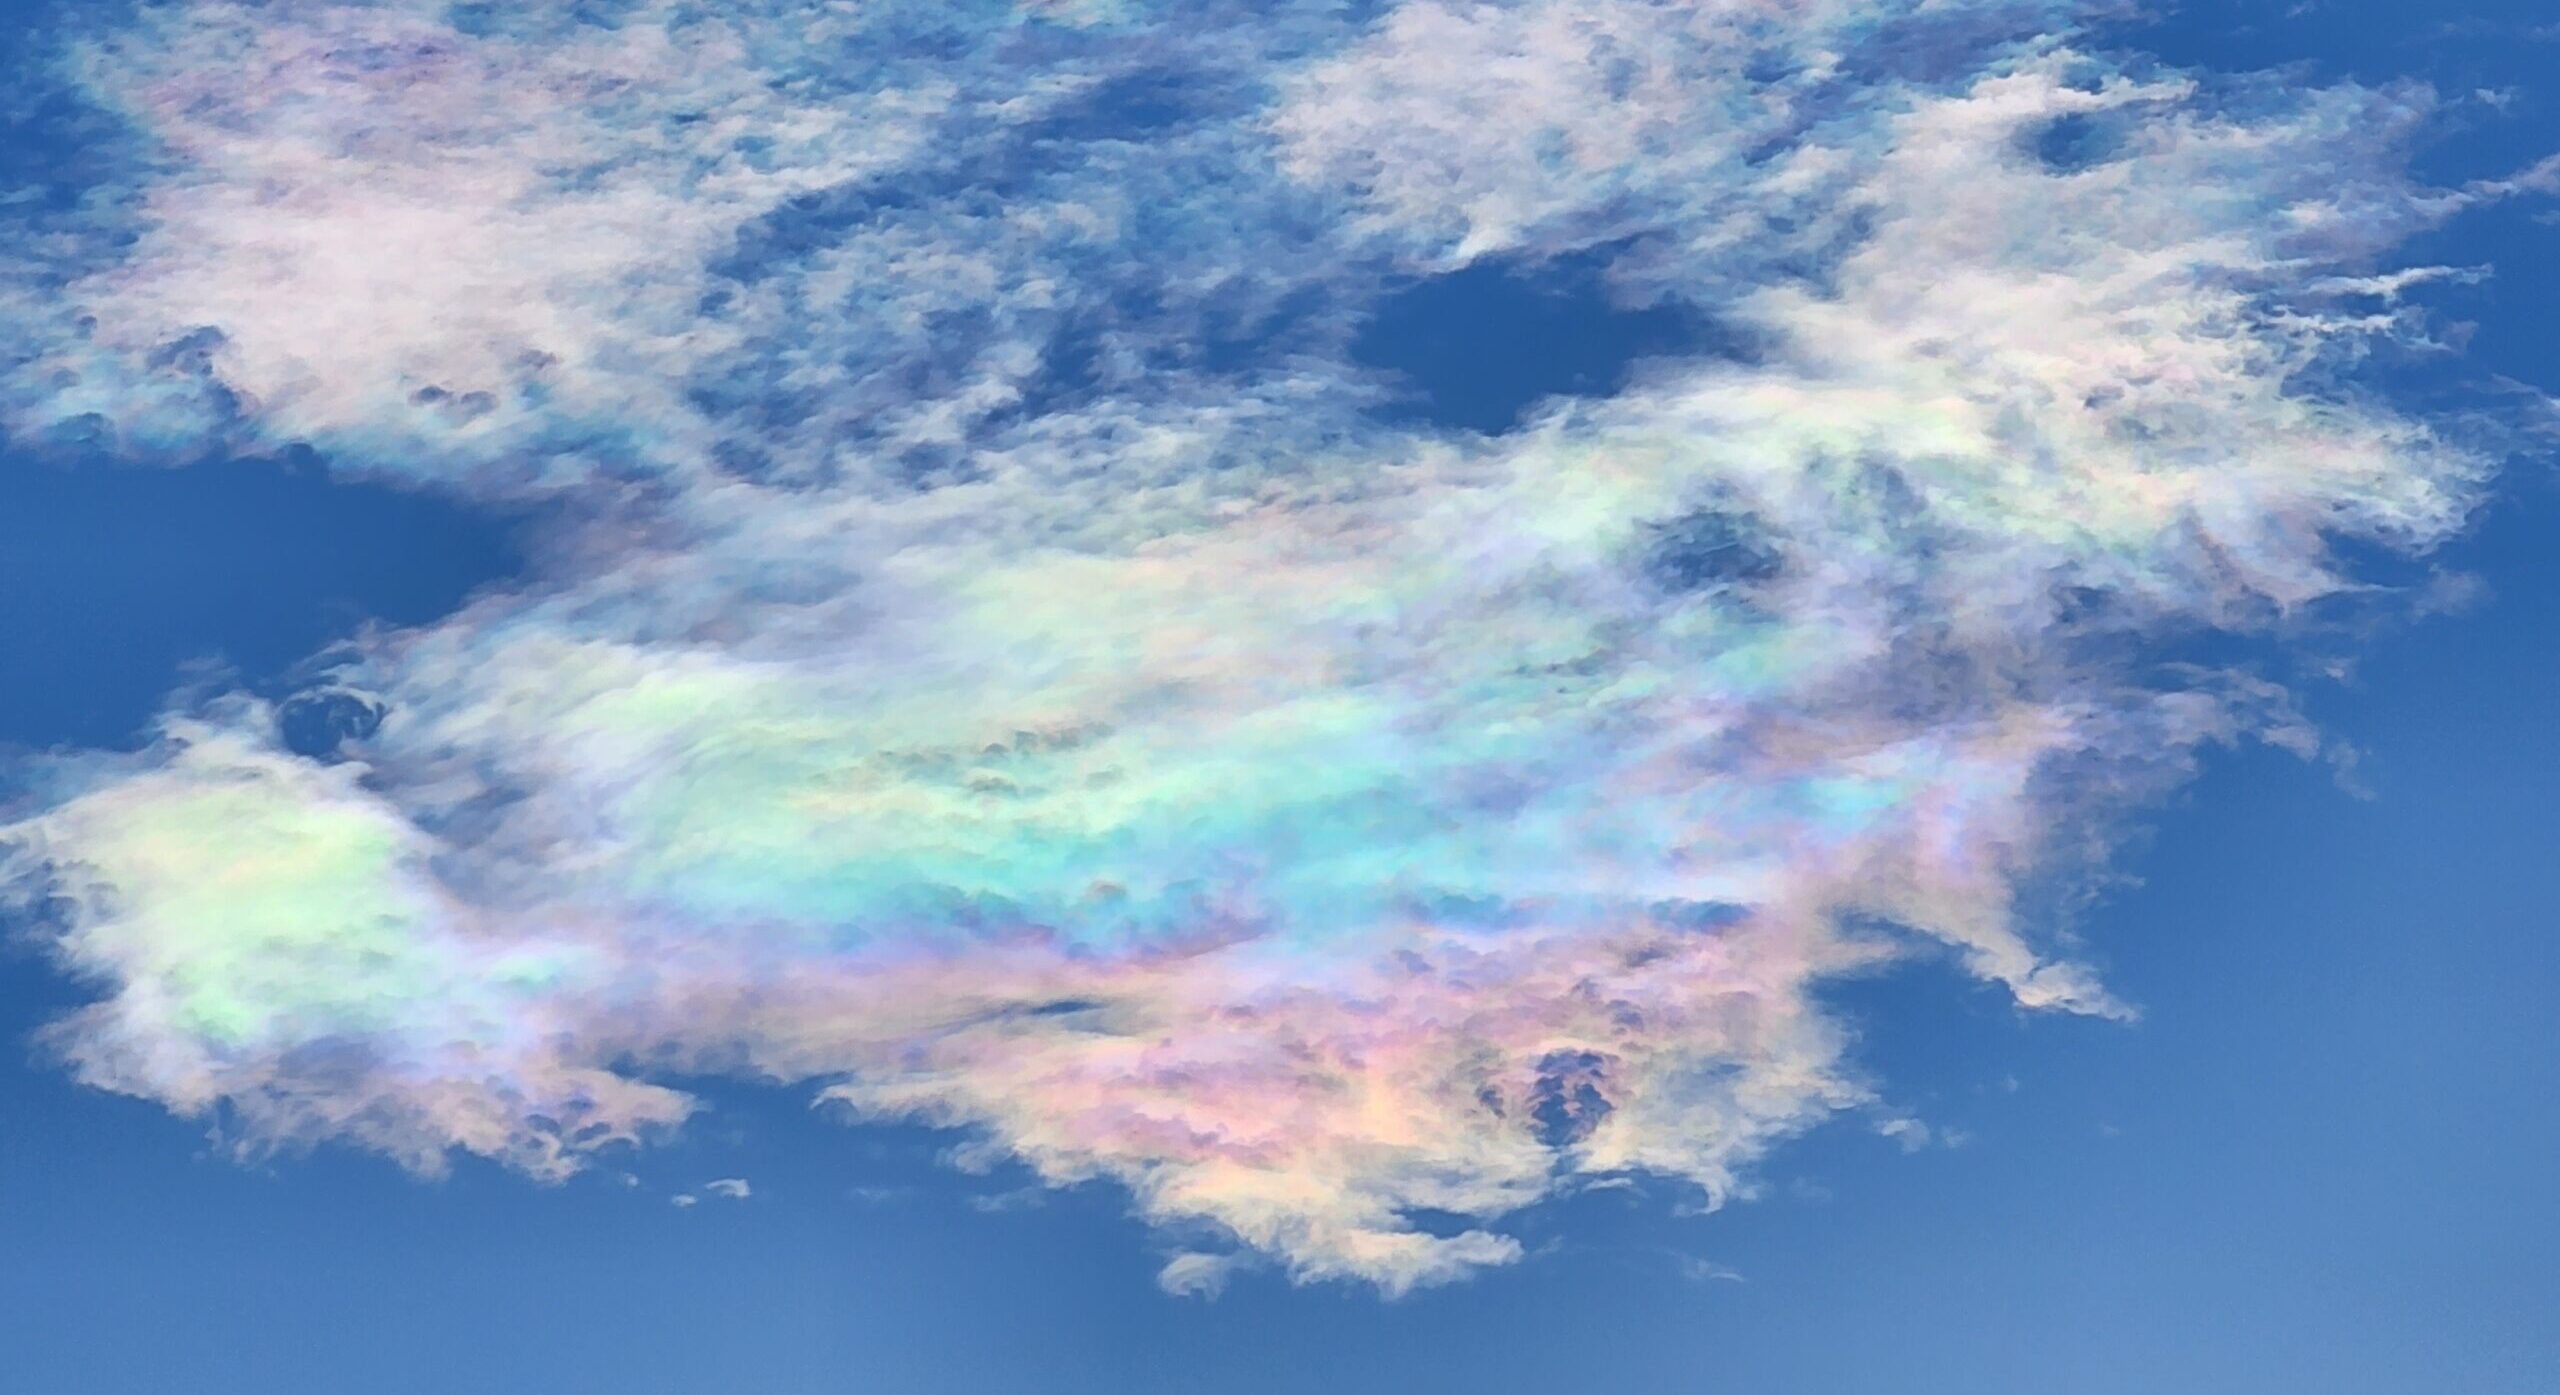 Clouds with rainbow iridescence